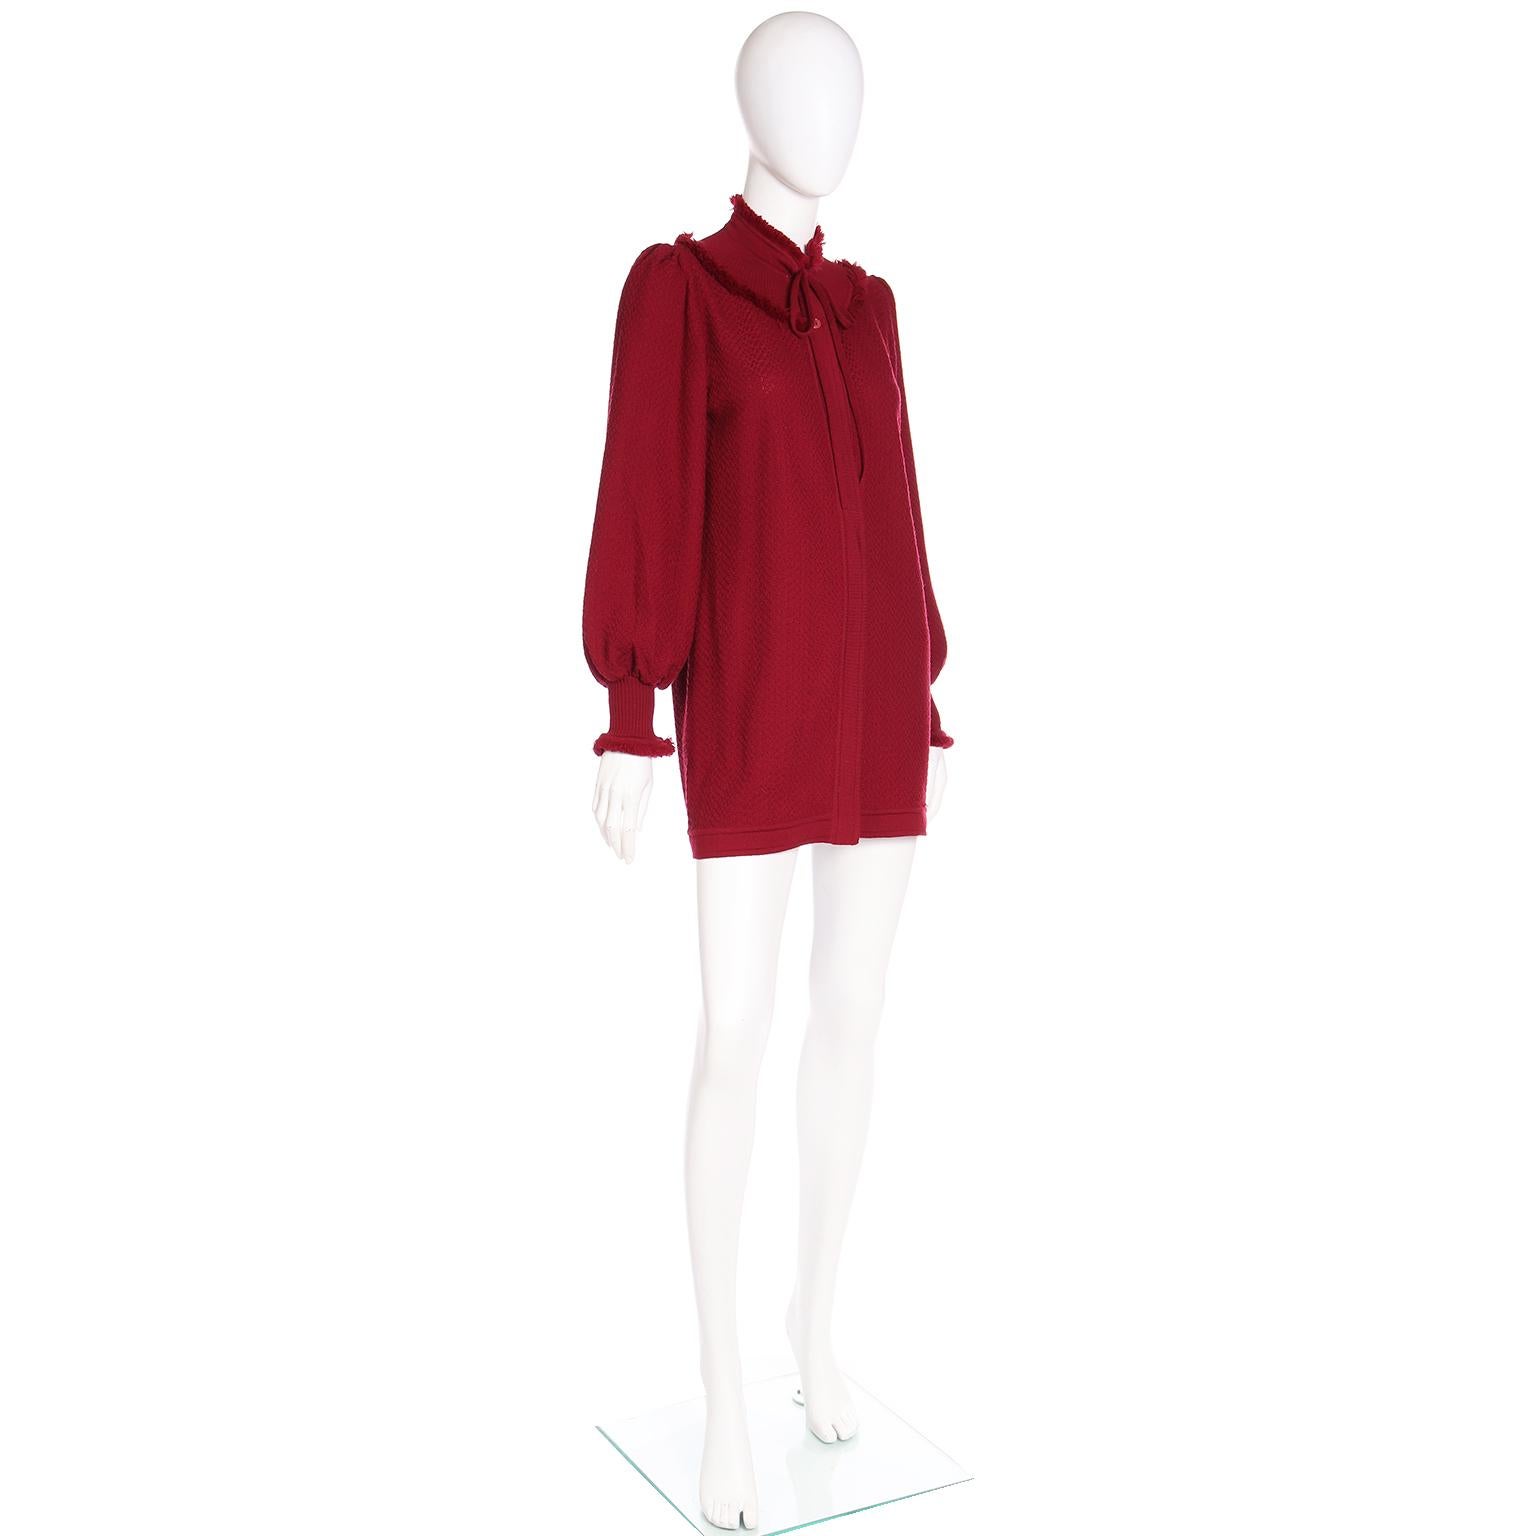 Vintage Yves Saint Laurent 1970s Burgundy Red Fringe Wool Knit Sweater In Excellent Condition For Sale In Portland, OR